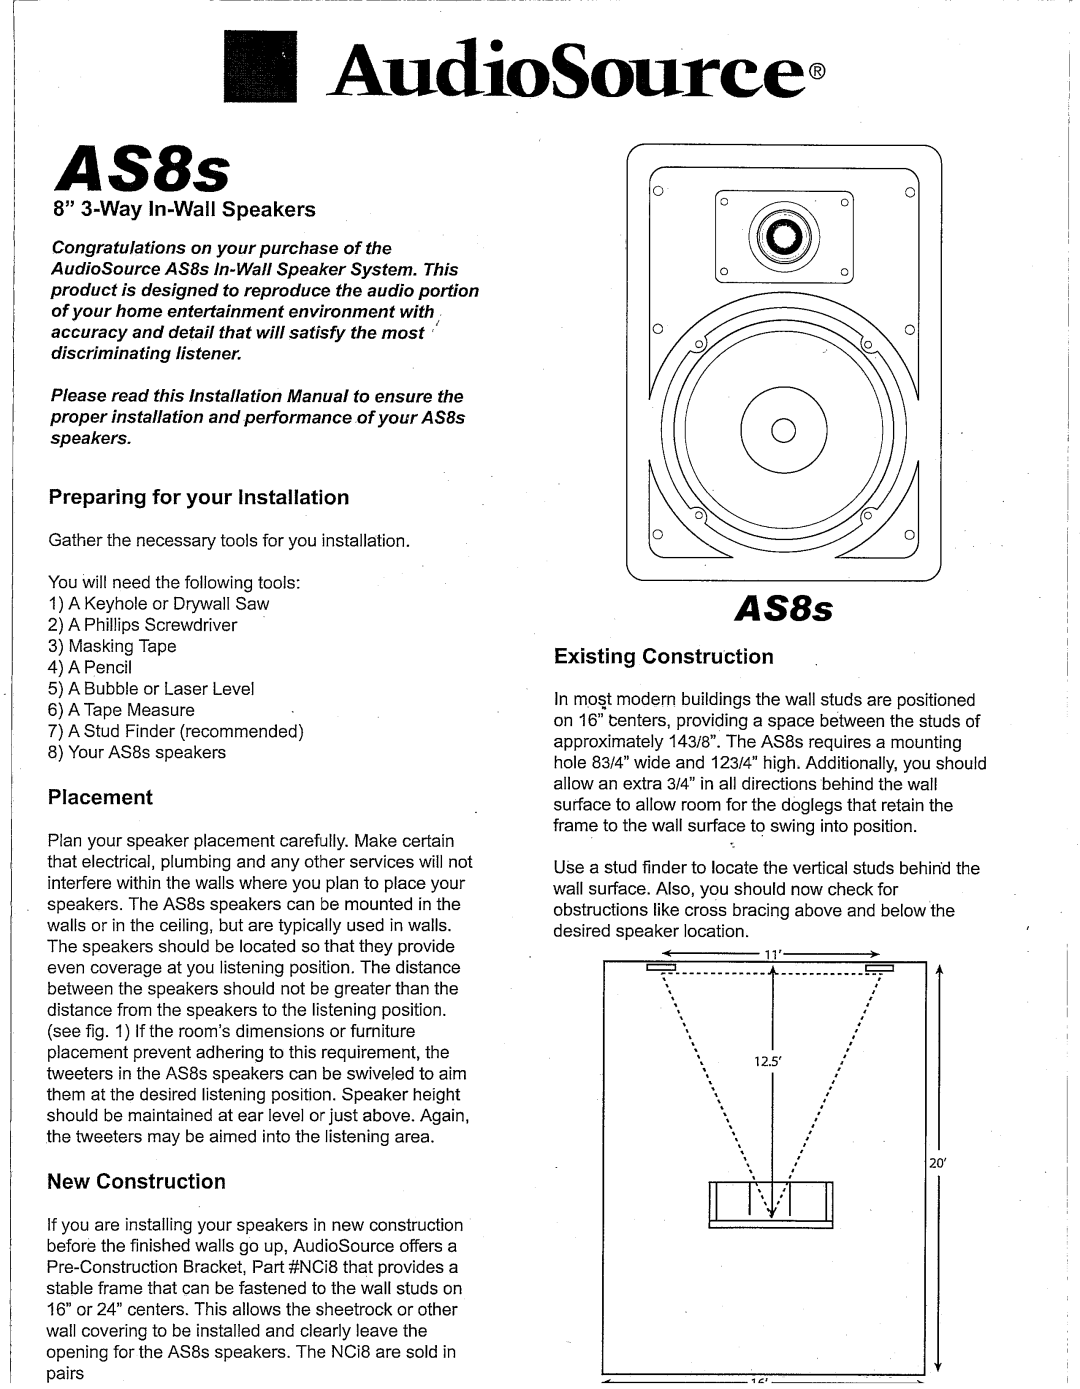 AudioSource AudioSource 8" 3-Way In-Wall Speakers, AS8s manual 